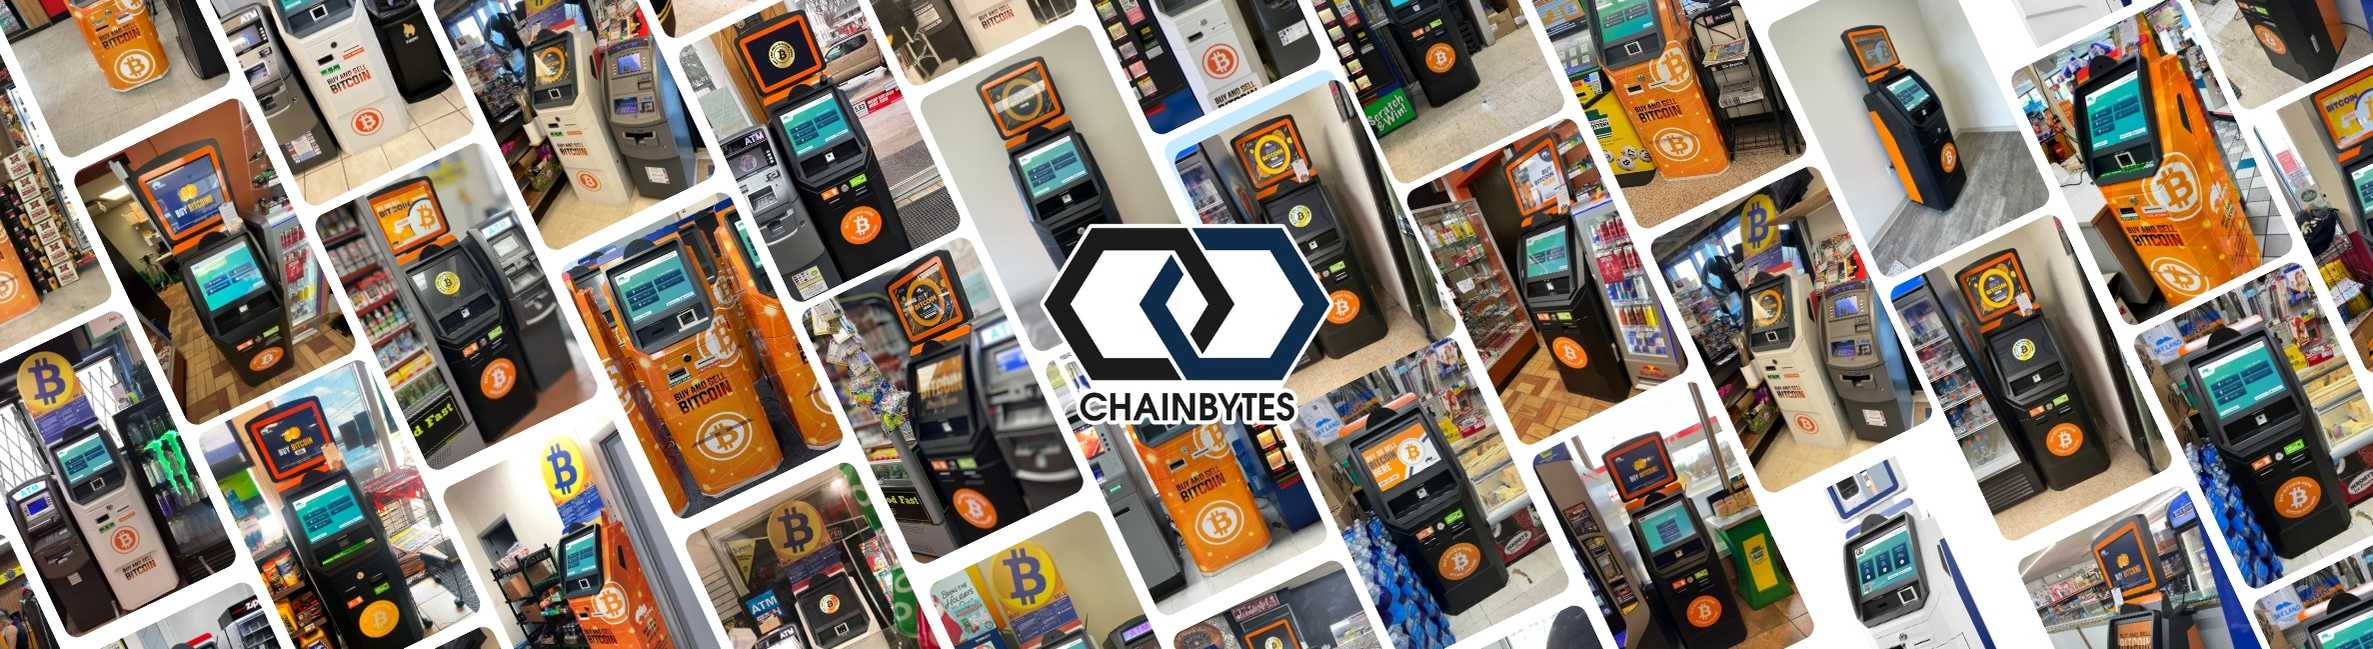 ChainBytes collage pictures of Bitcoin ATMs